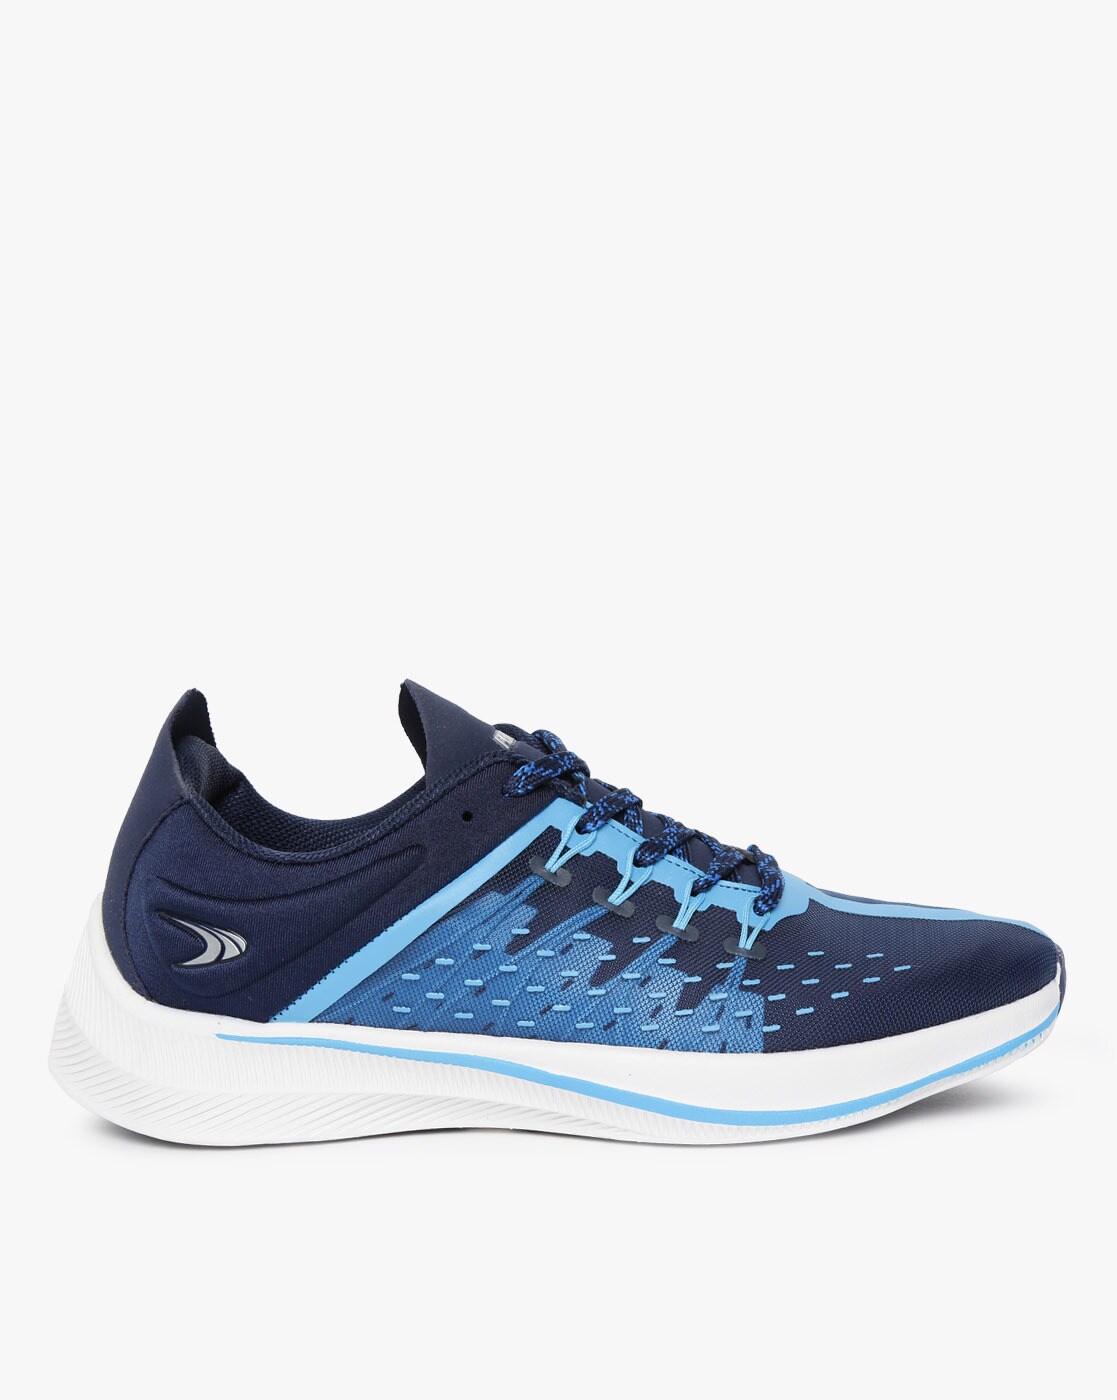 Buy Navy Blue Sports Shoes for Men by 